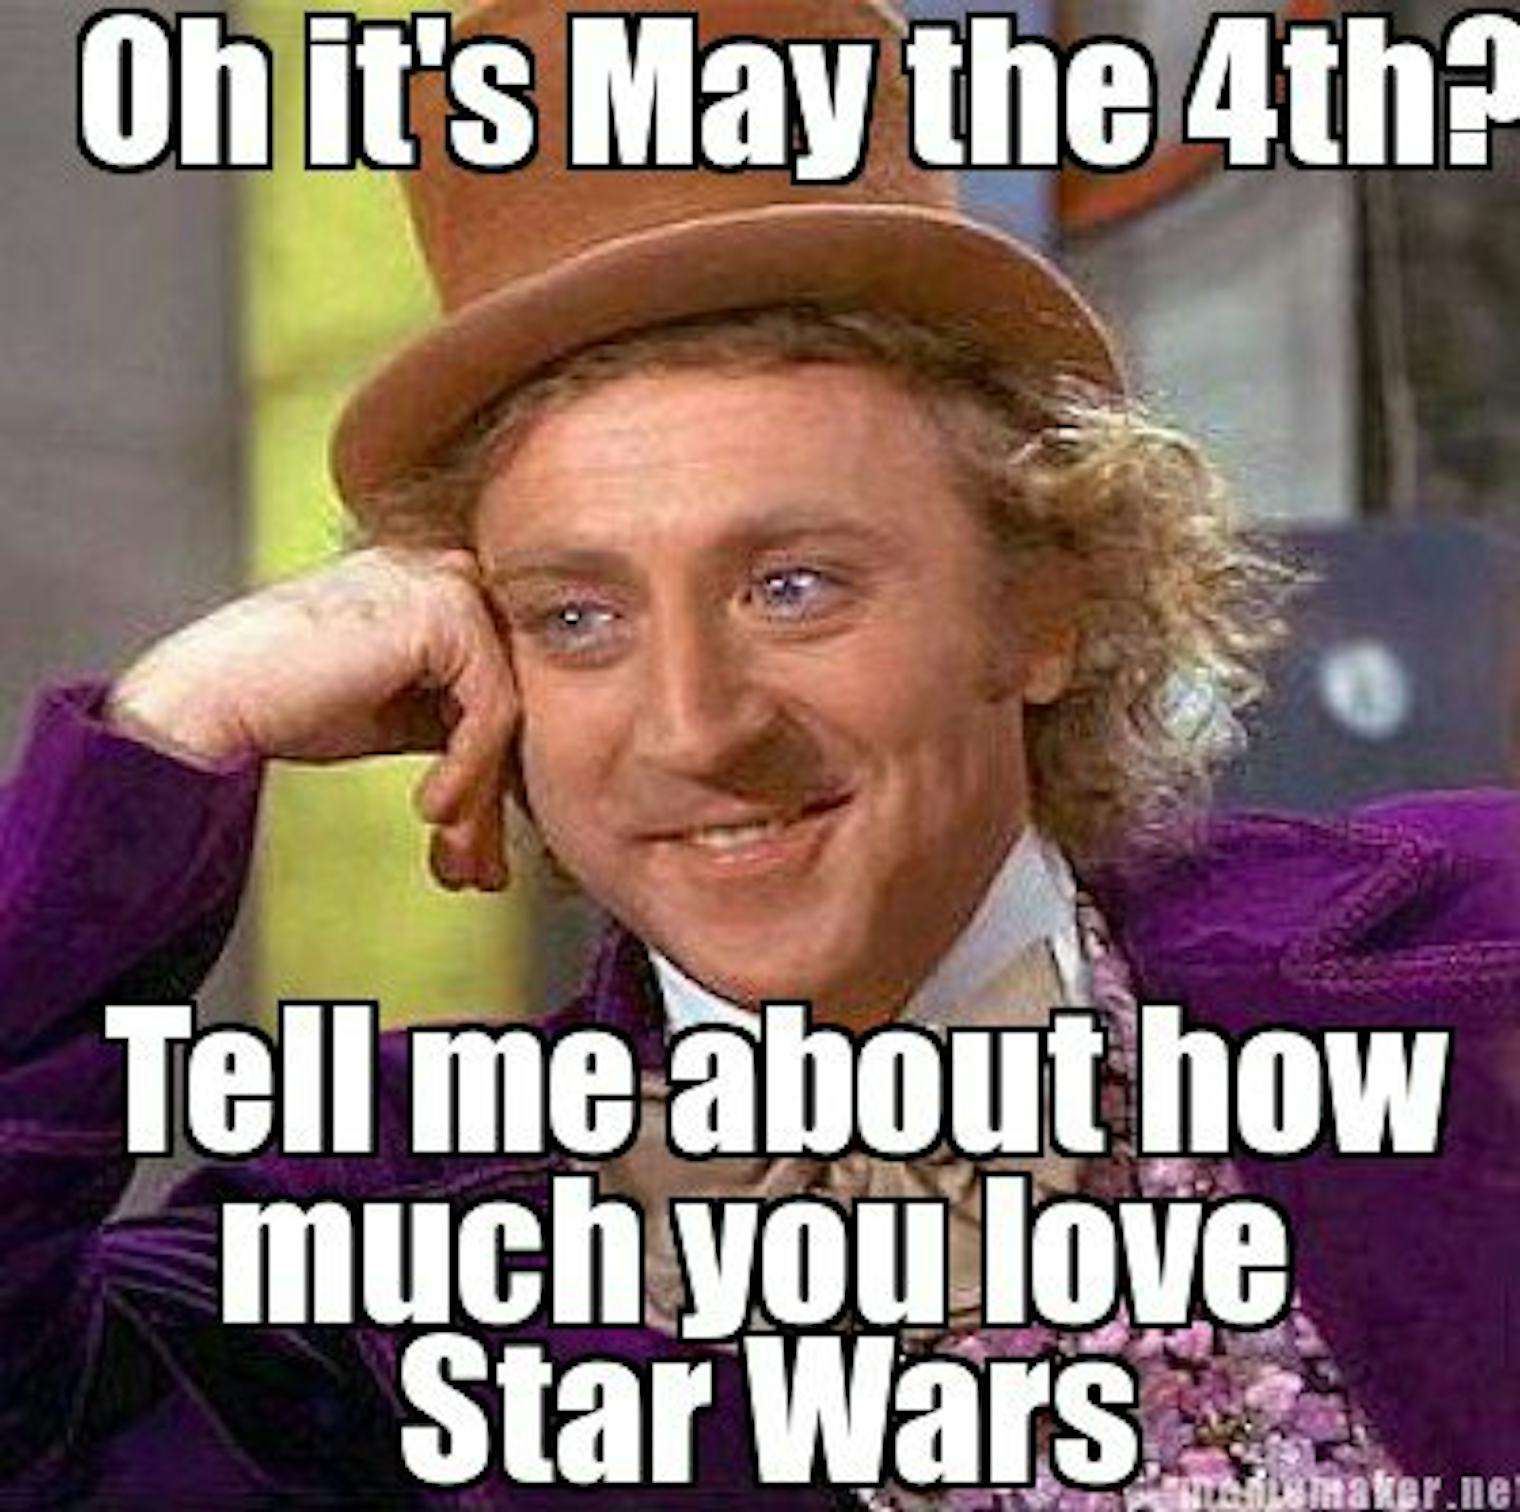 14 "May The Fourth Be With You" Memes To Celebrate Star Wars Day